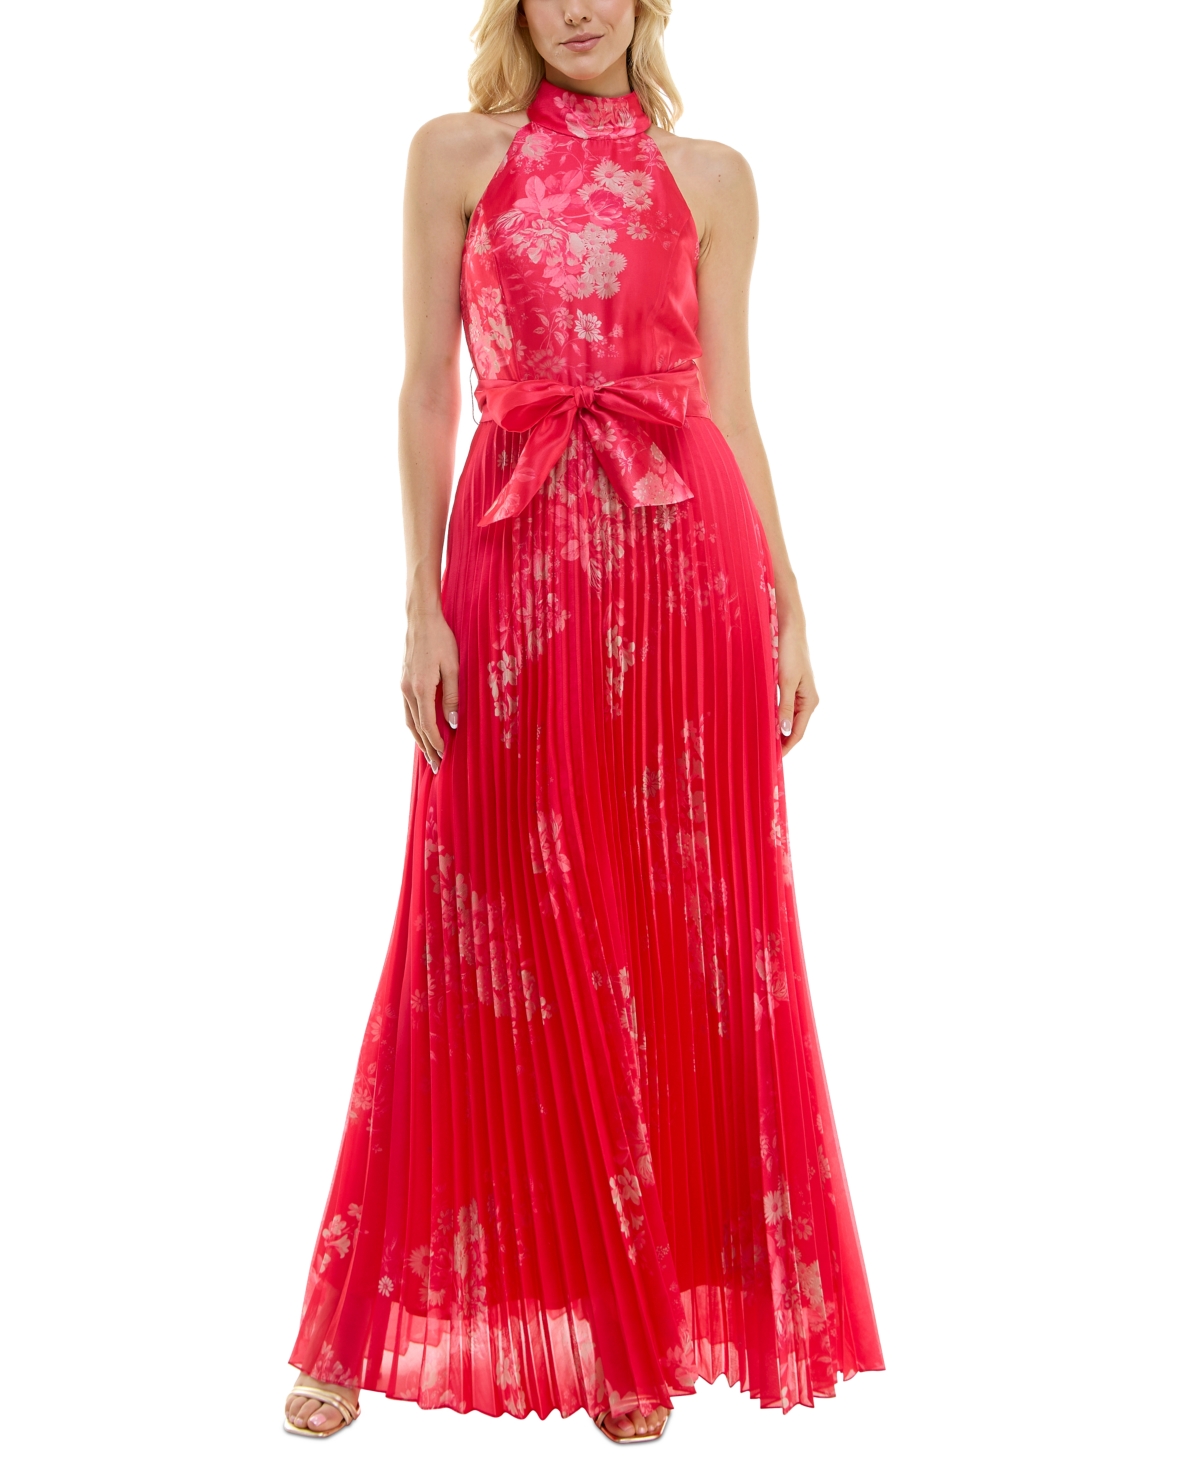 Women's Floral-Print Pleated Gown - Firey Rose